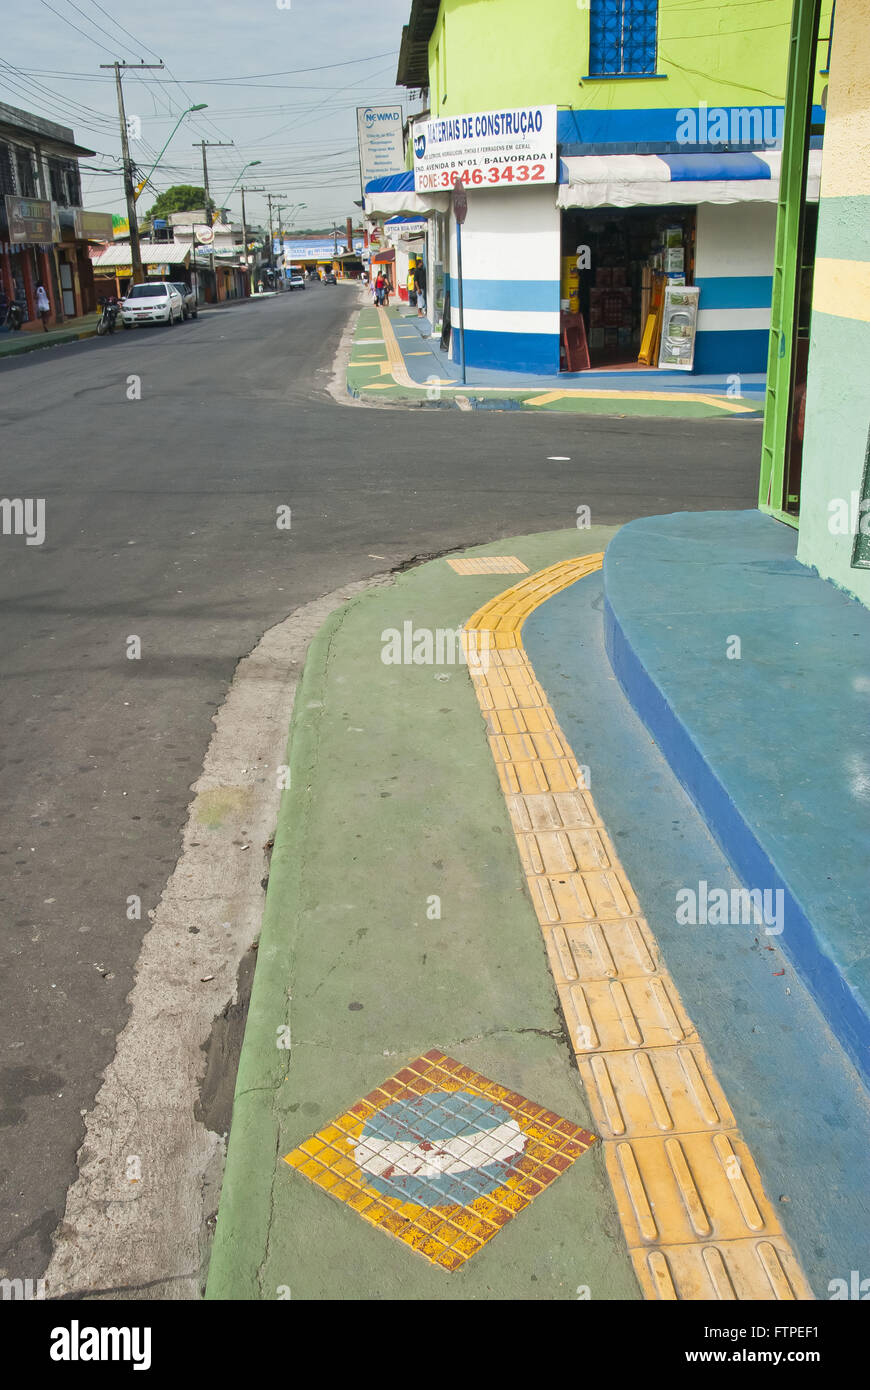 Causeway floored guide to visually impaired people in the city of Manaus decorated Stock Photo